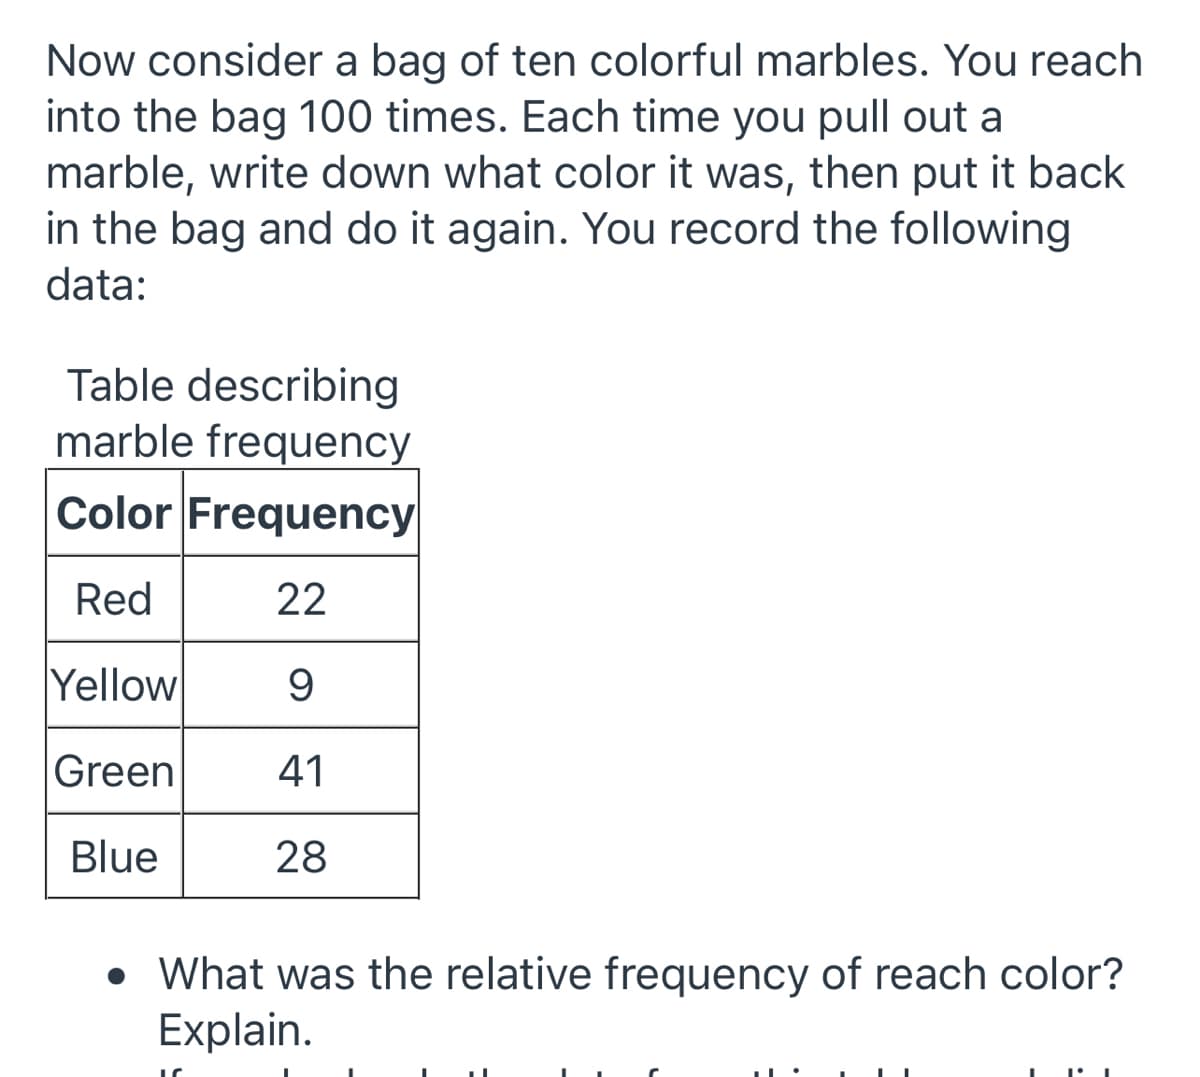 Now consider a bag of ten colorful marbles. You reach
into the bag 100 times. Each time you pull out a
marble, write down what color it was, then put it back
in the bag and do it again. You record the following
data:
Table describing
marble frequency
Color Frequency
Red
22
Yellow
9
Green
41
Blue
28
• What was the relative frequency of reach color?
Explain.
1°